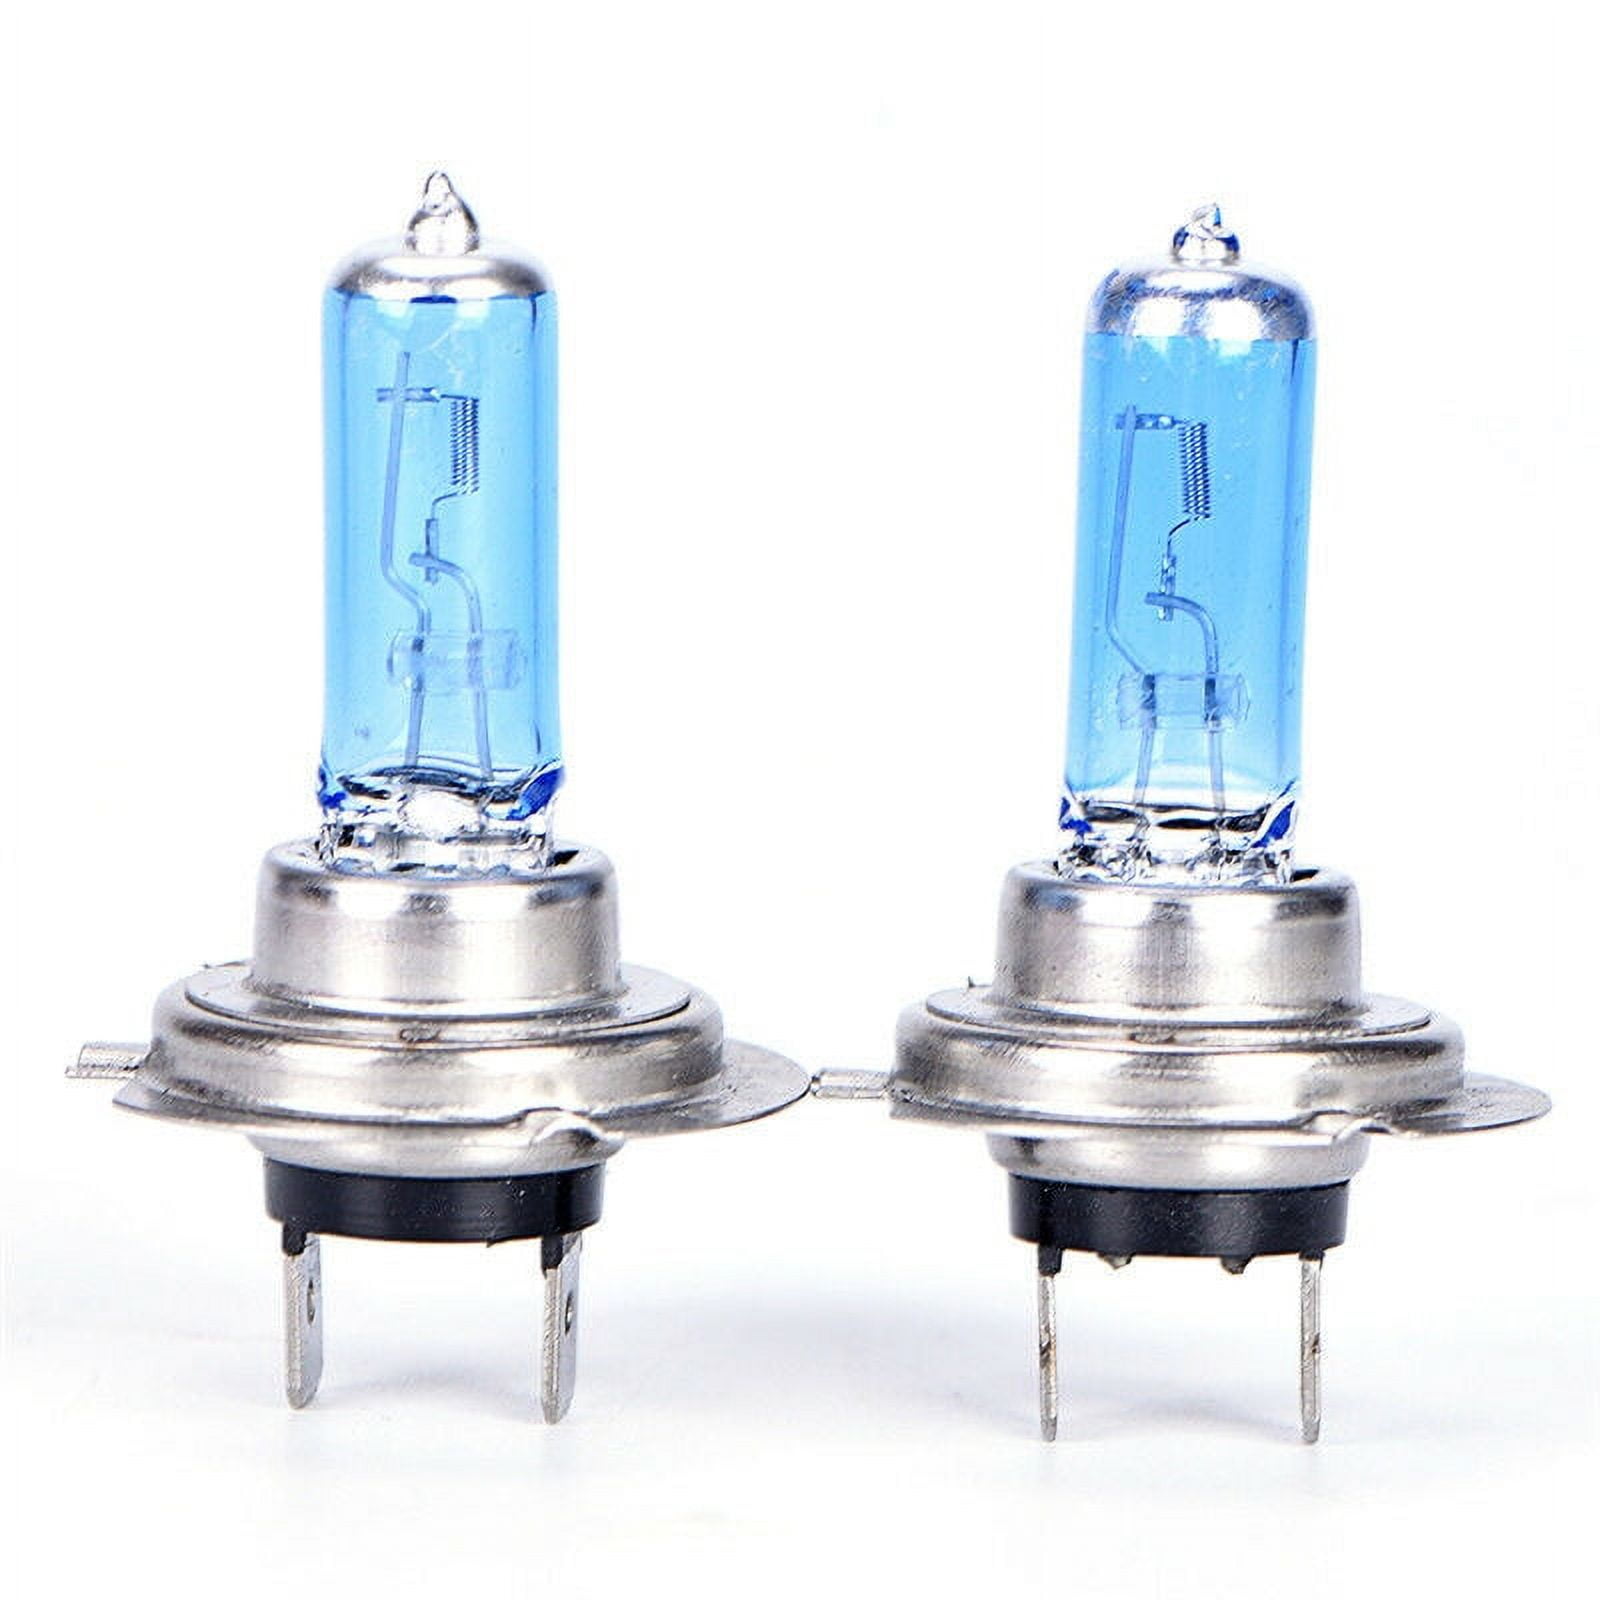 NEWBROWN H7 Halogen Headlight Bulb with Super White Light Long Life  Replacement PX26D 12V/55W (2 Pack)